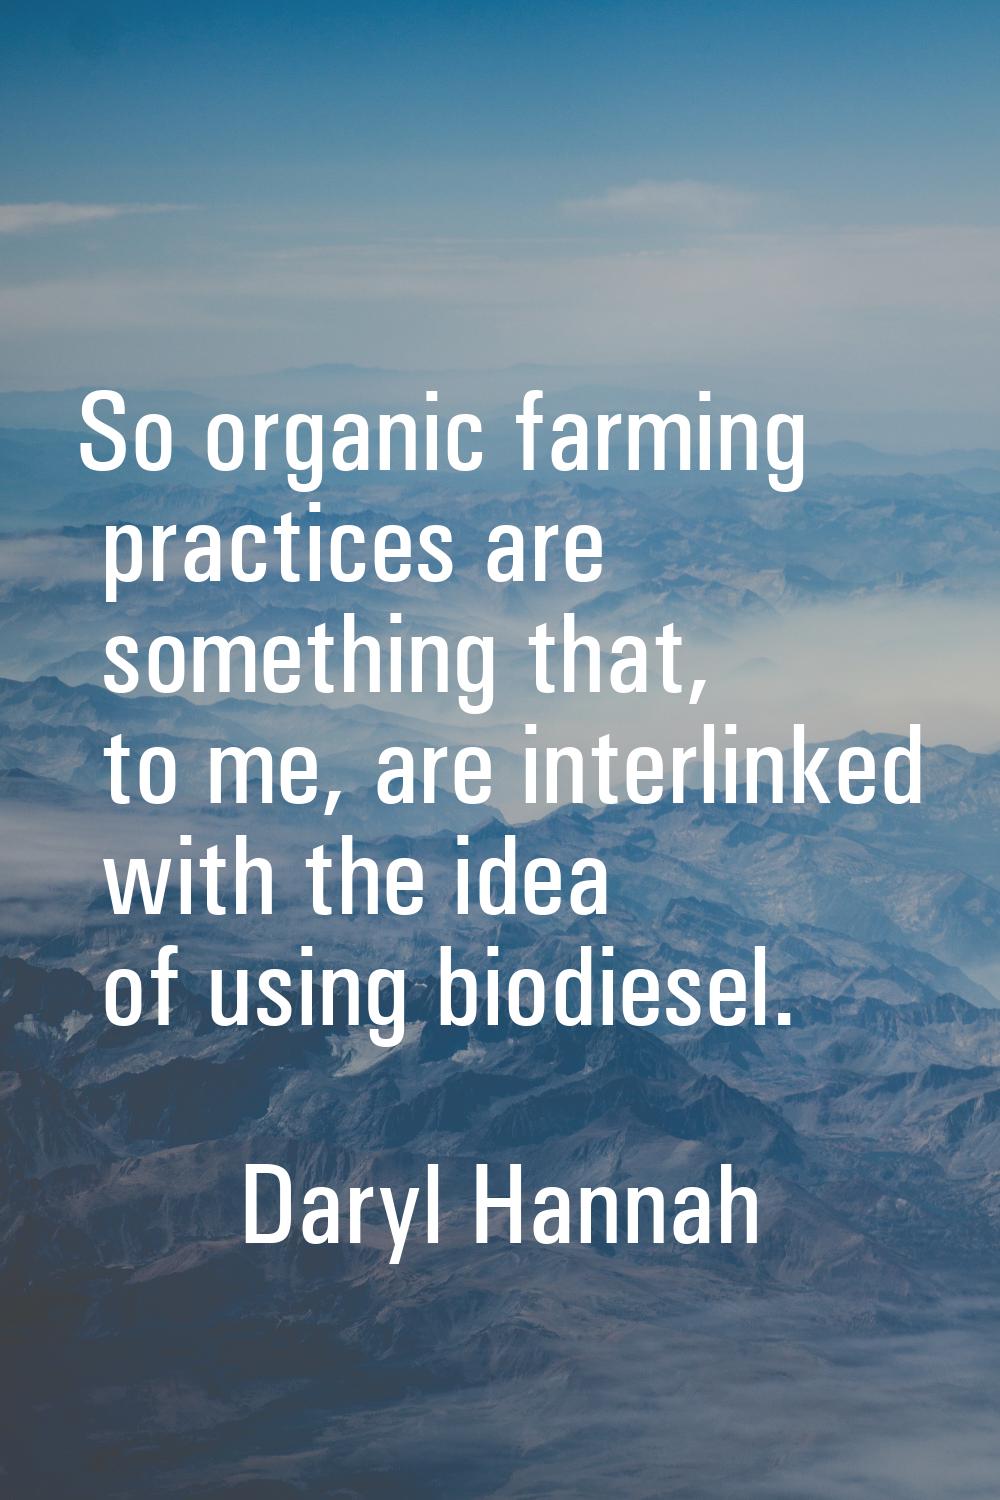 So organic farming practices are something that, to me, are interlinked with the idea of using biod